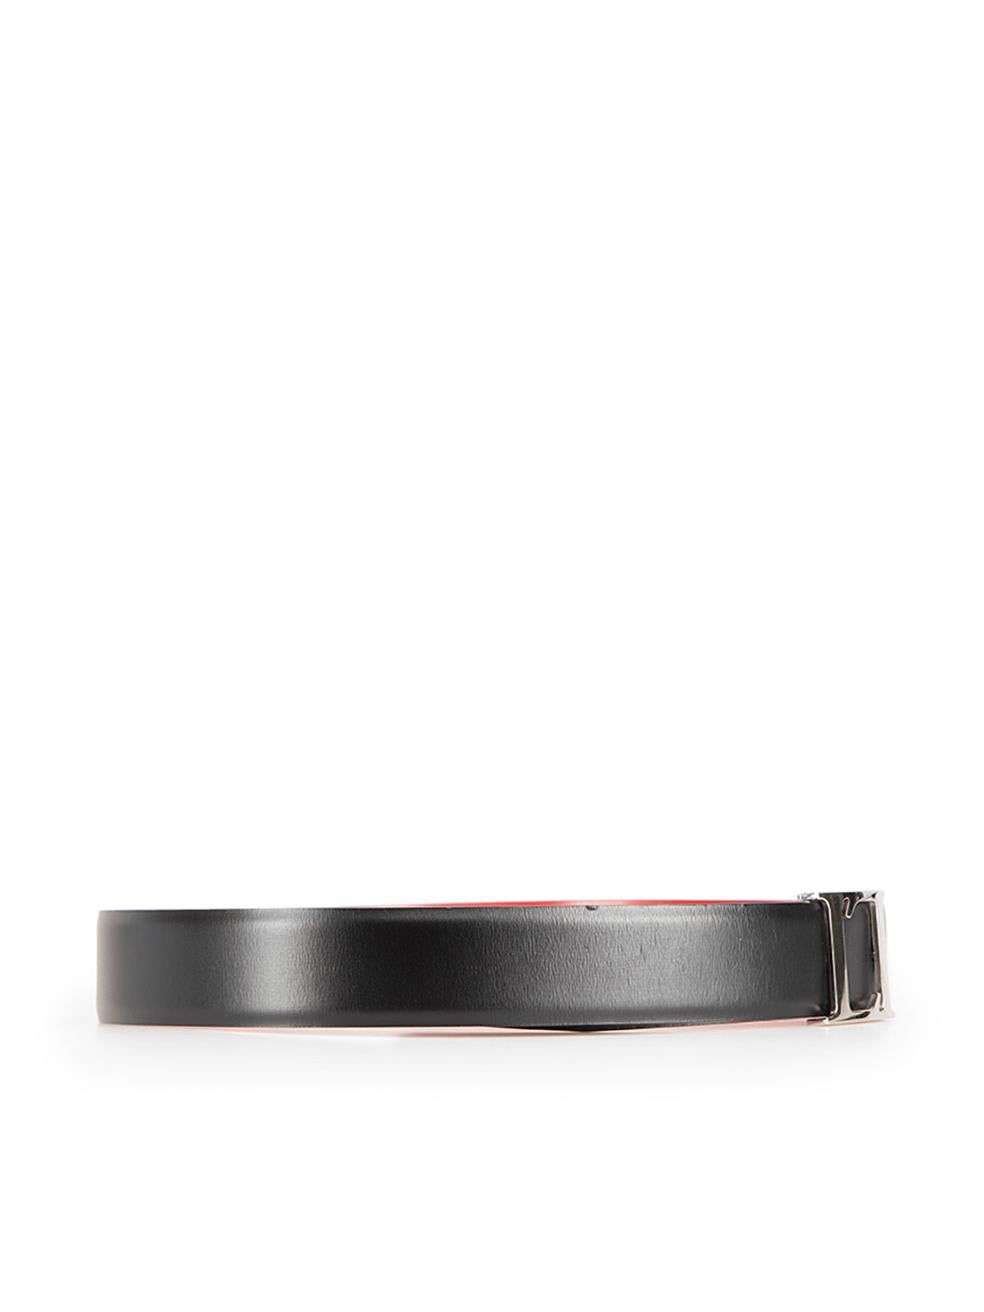 CONDITION is Very good. Minimal wear to belt is evident. Minimal wear to the buckle with light scratches to the metal, there are also some indents to the leather on this used Loewe designer resale item.

Details
Black
Leather
Belt
Silver logo